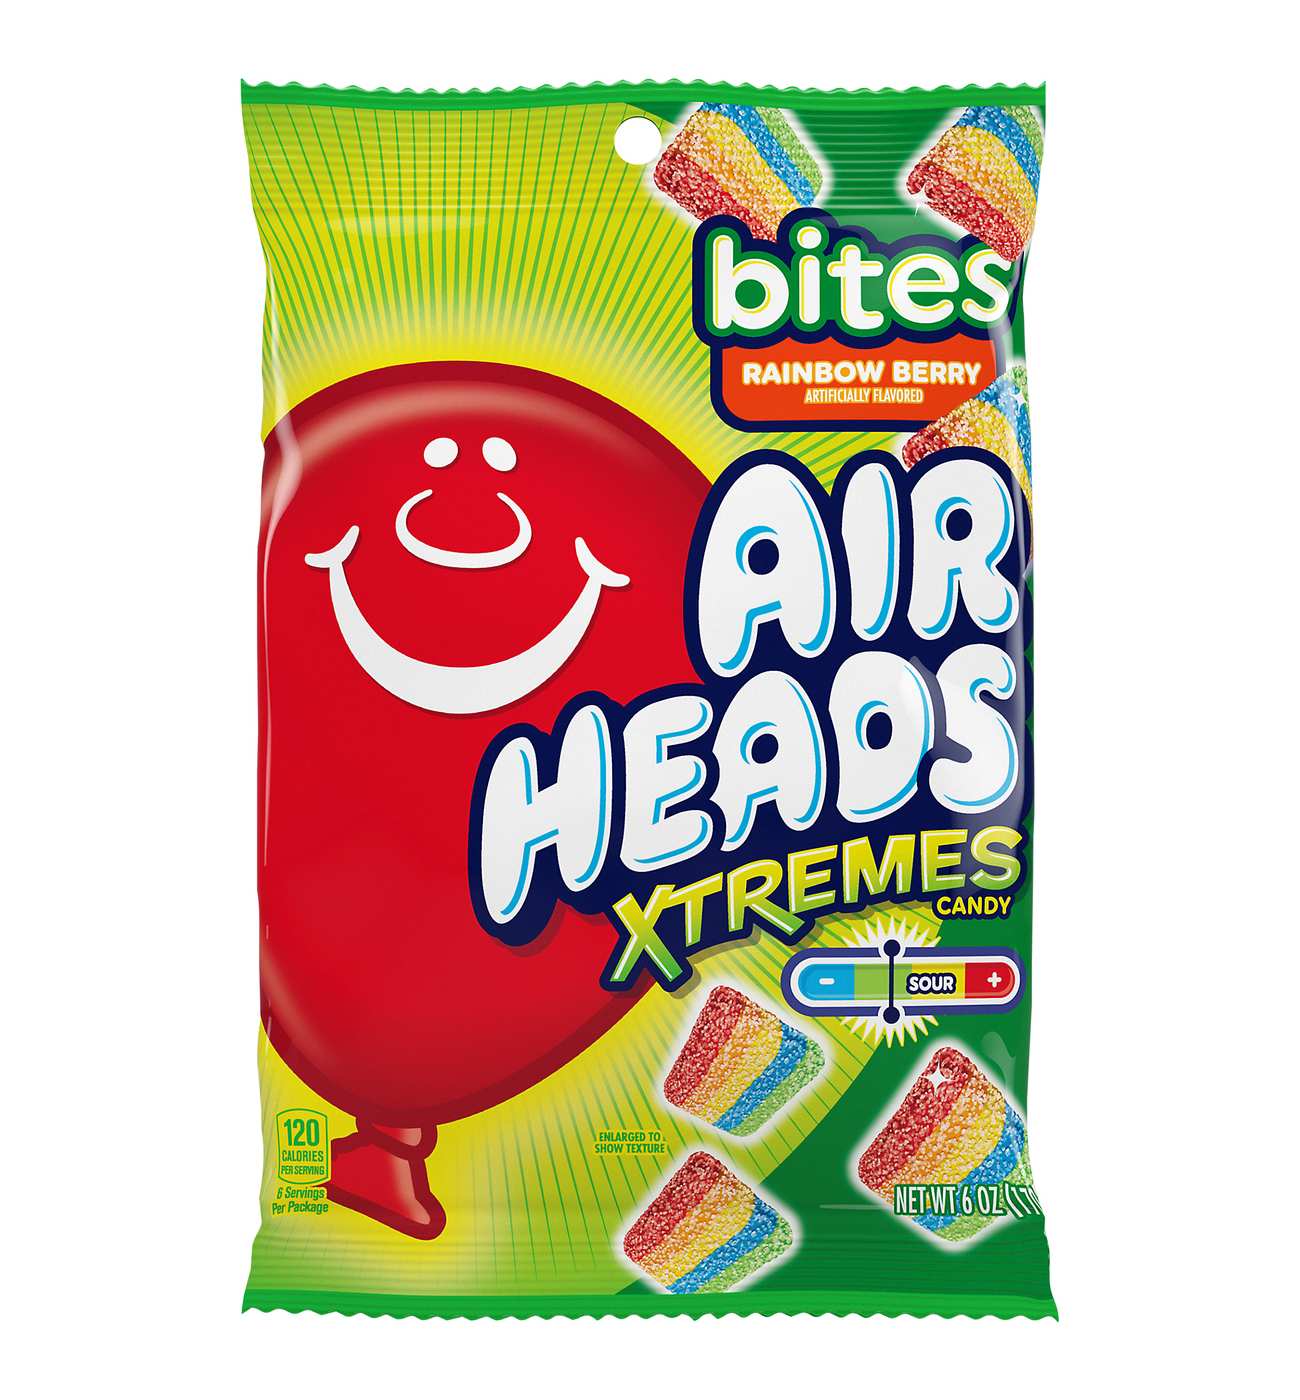 Airheads Xtremes Sour Rainbow Berry Candy Bites; image 1 of 2